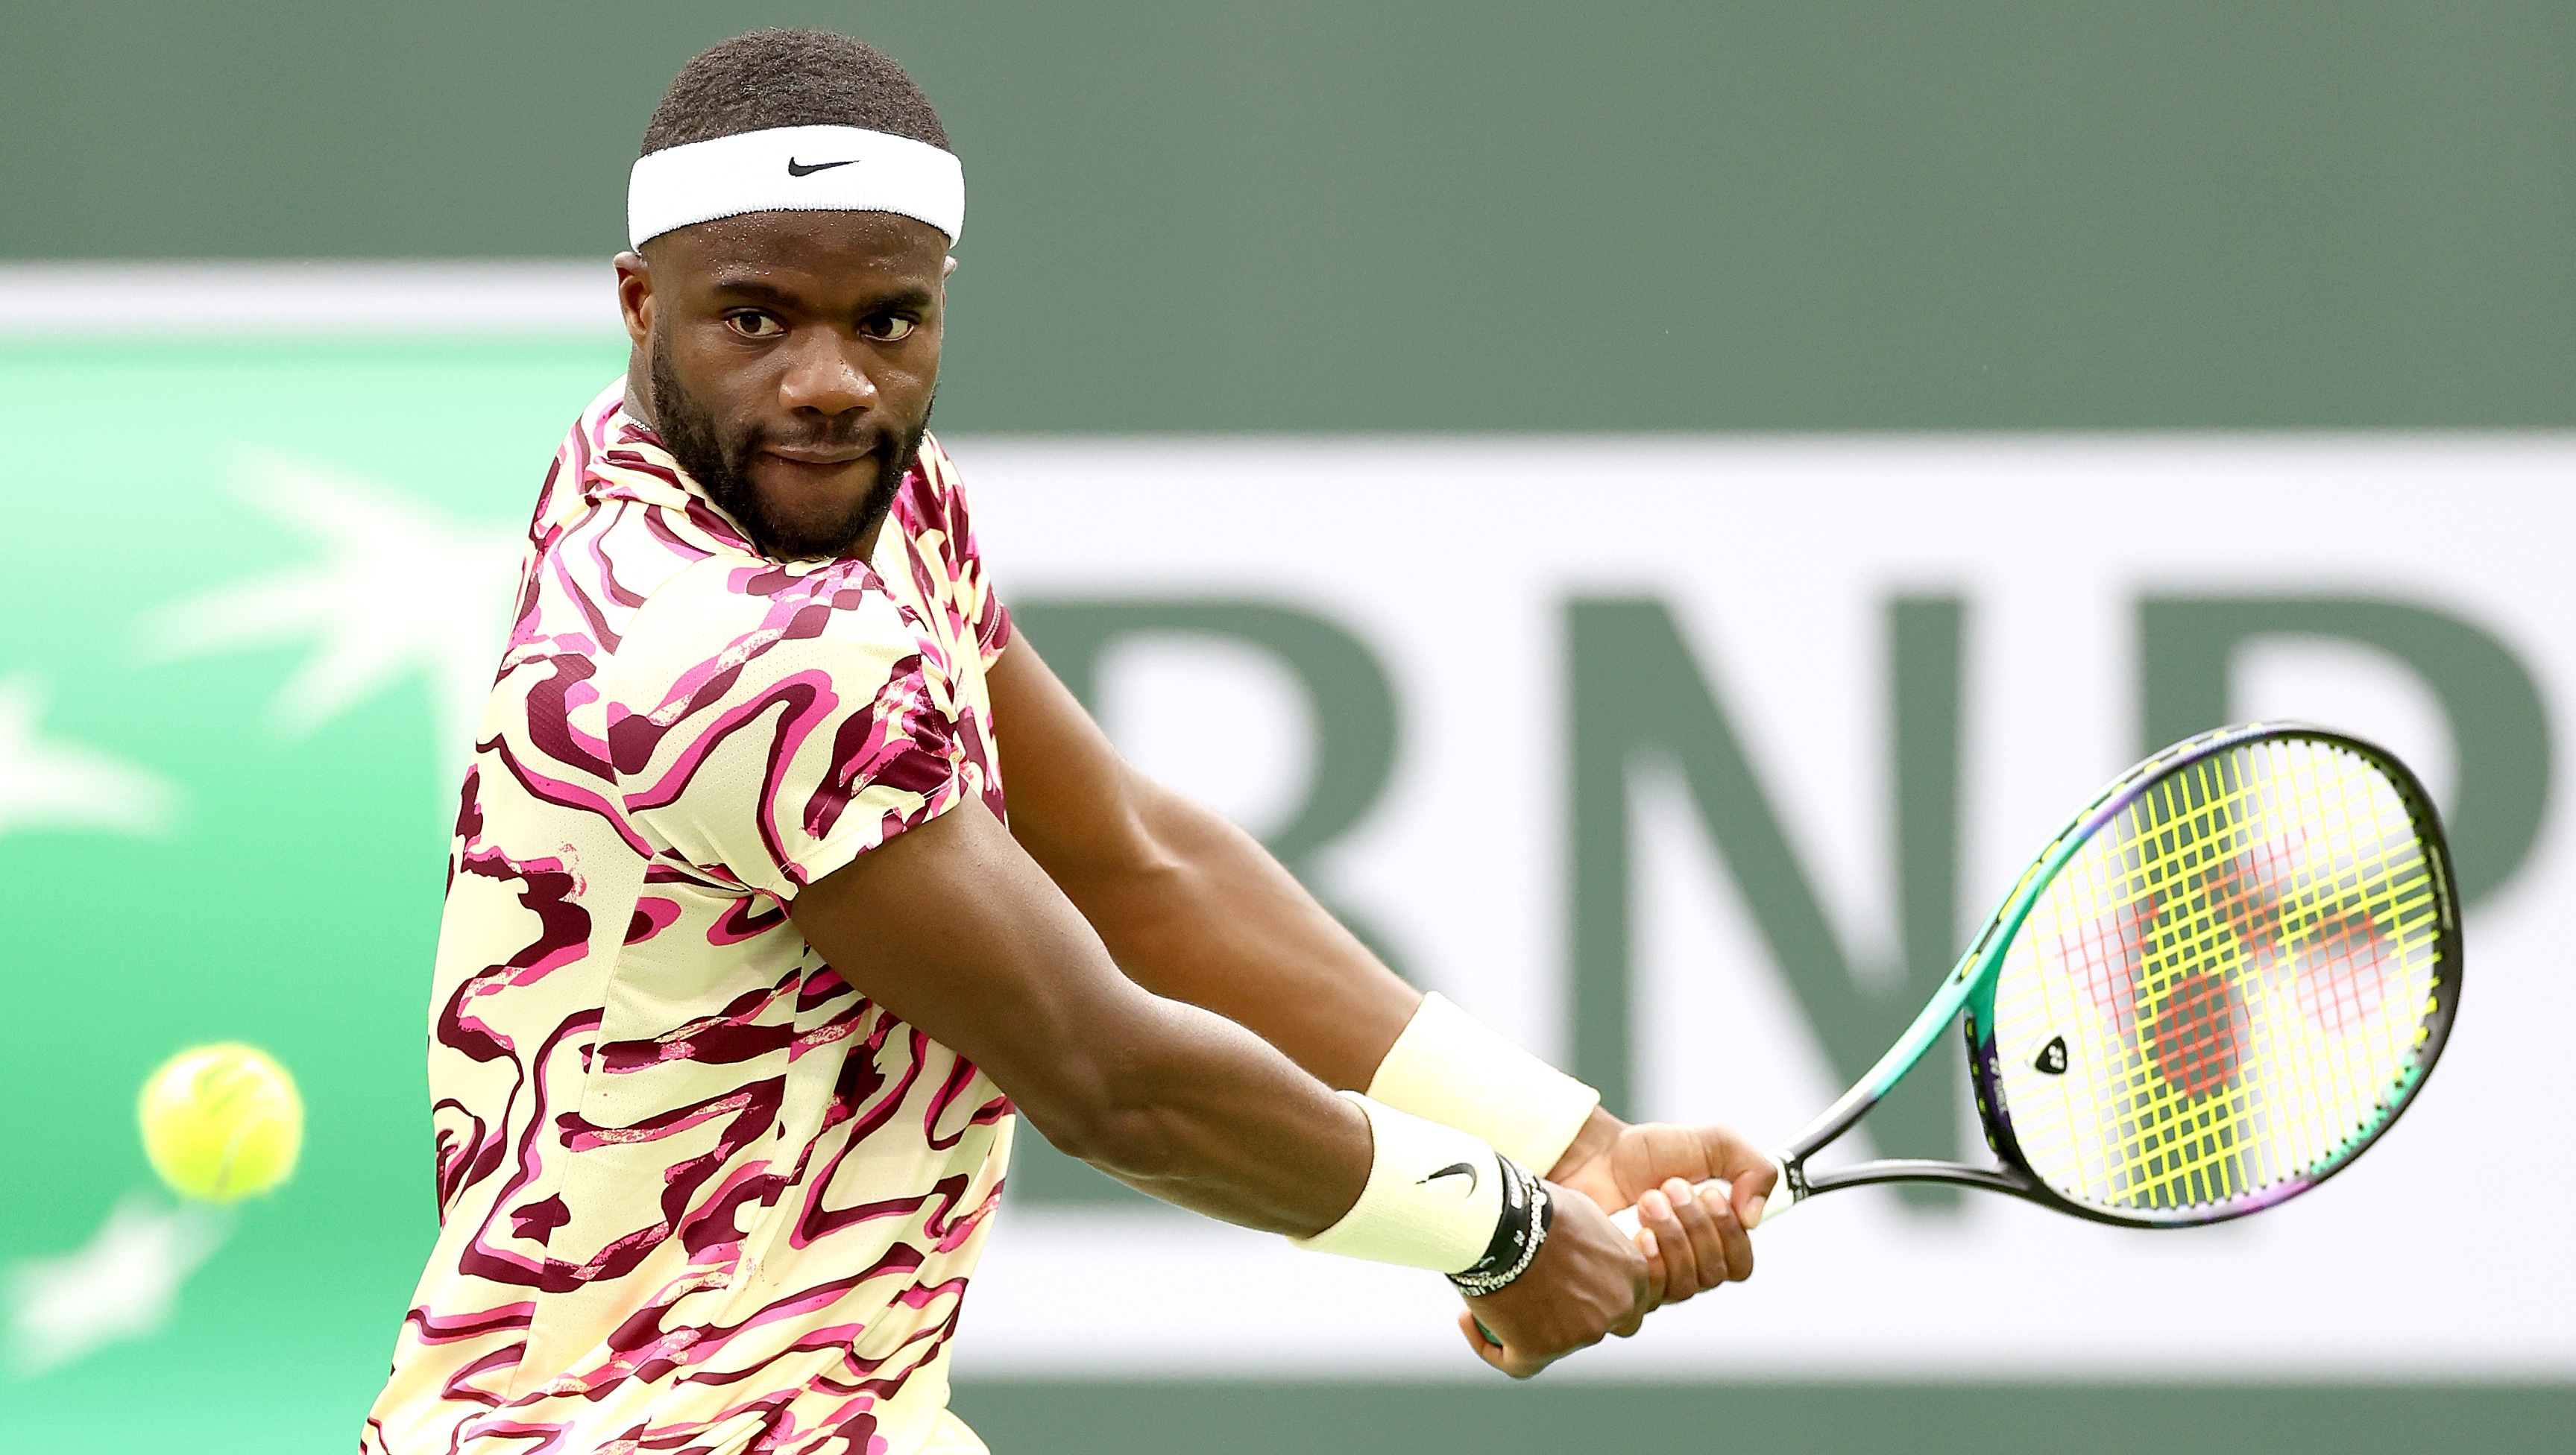 Stat of the Day Frances Tiafoe extends winning streak against lefties to 14 matches in a row